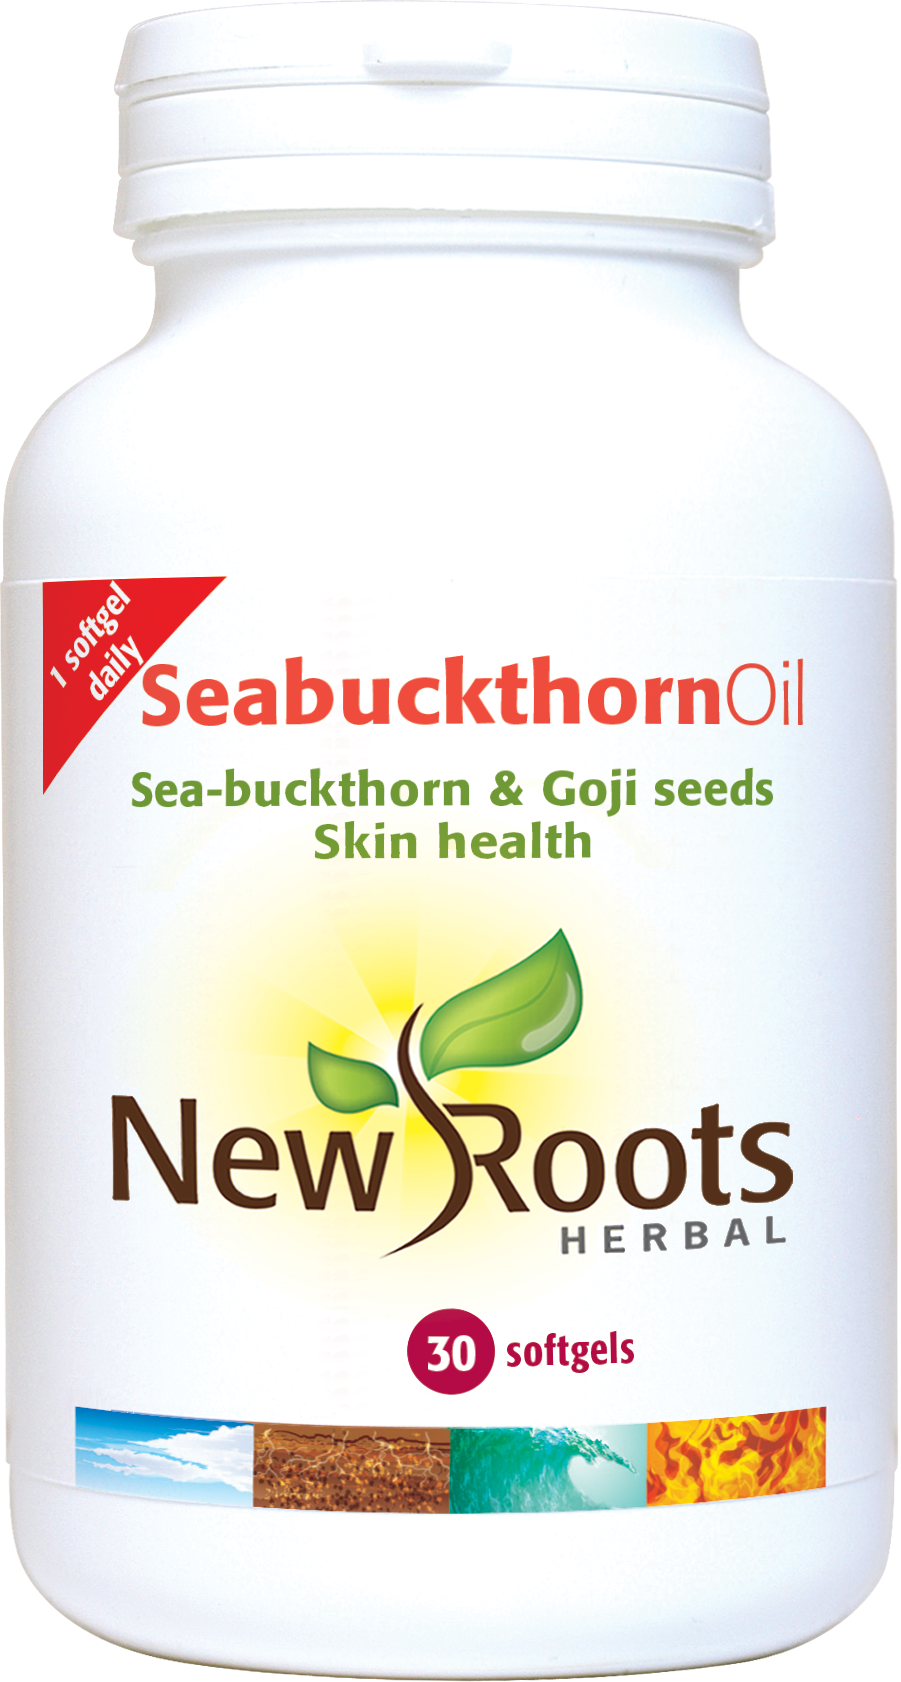 Seabuckthorn Oil - 30 Softgels | New Roots Herbal